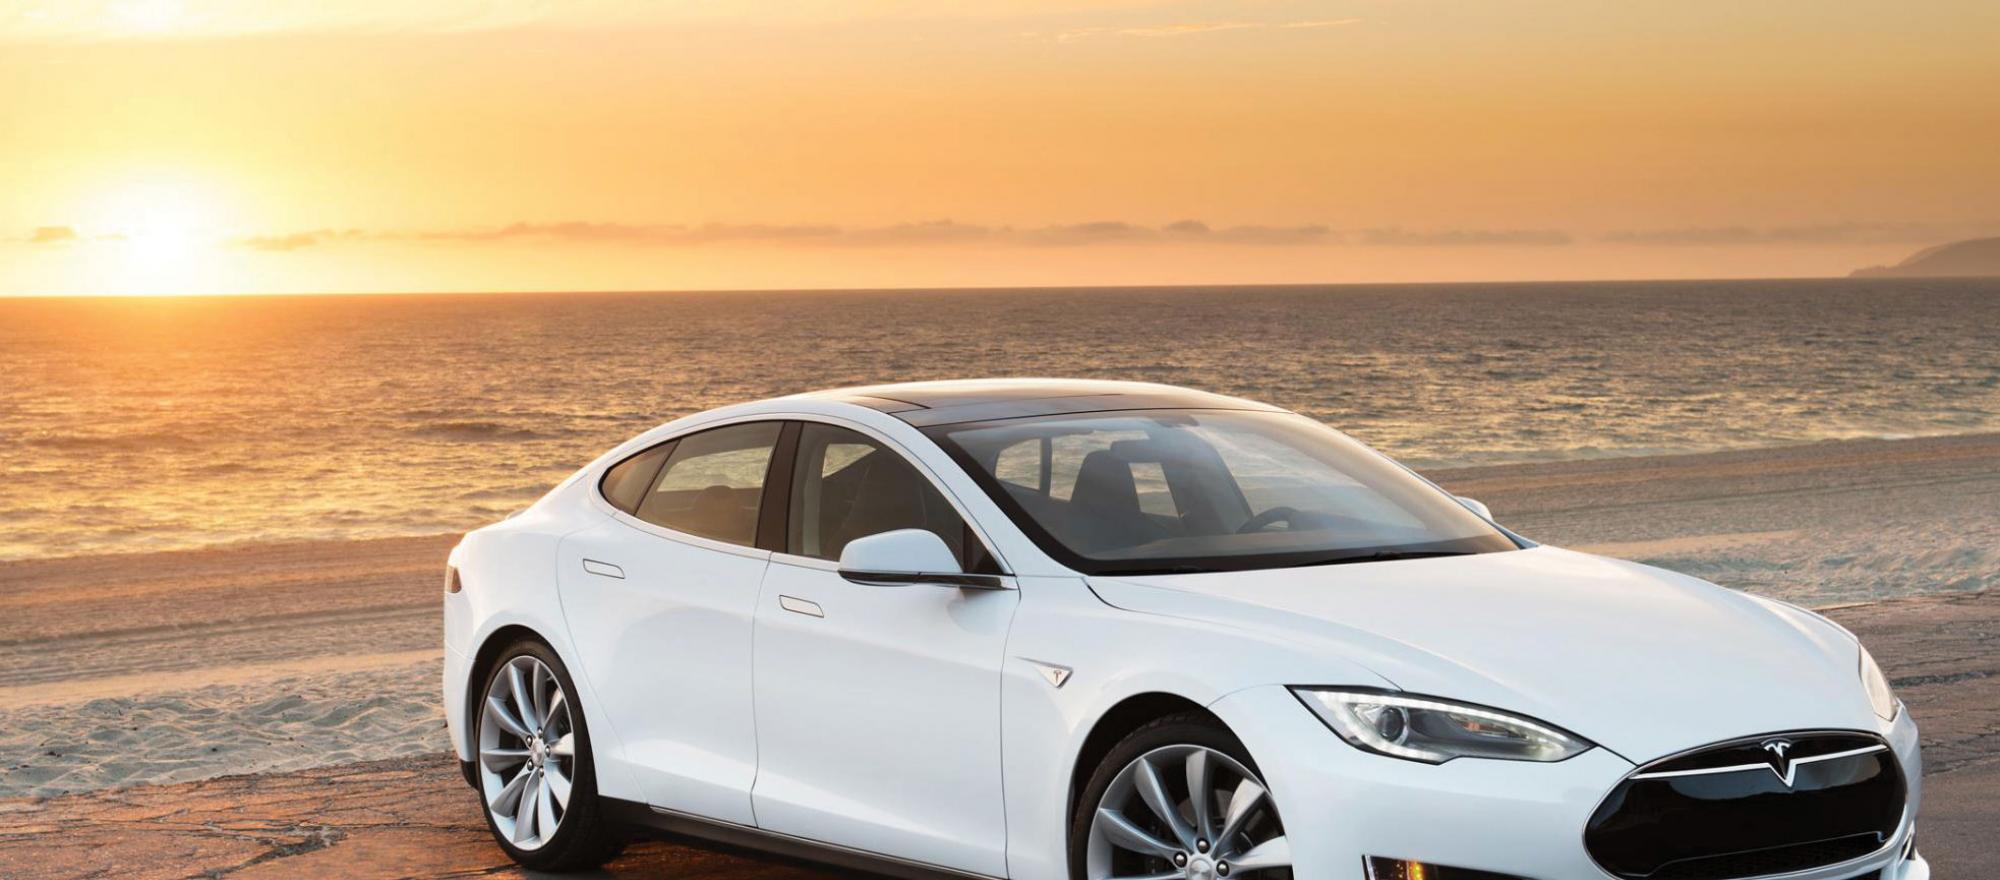 If you’re thinking about buying a luxury electric car, there is only one choice, says our reviewer: the Tesla Model S.